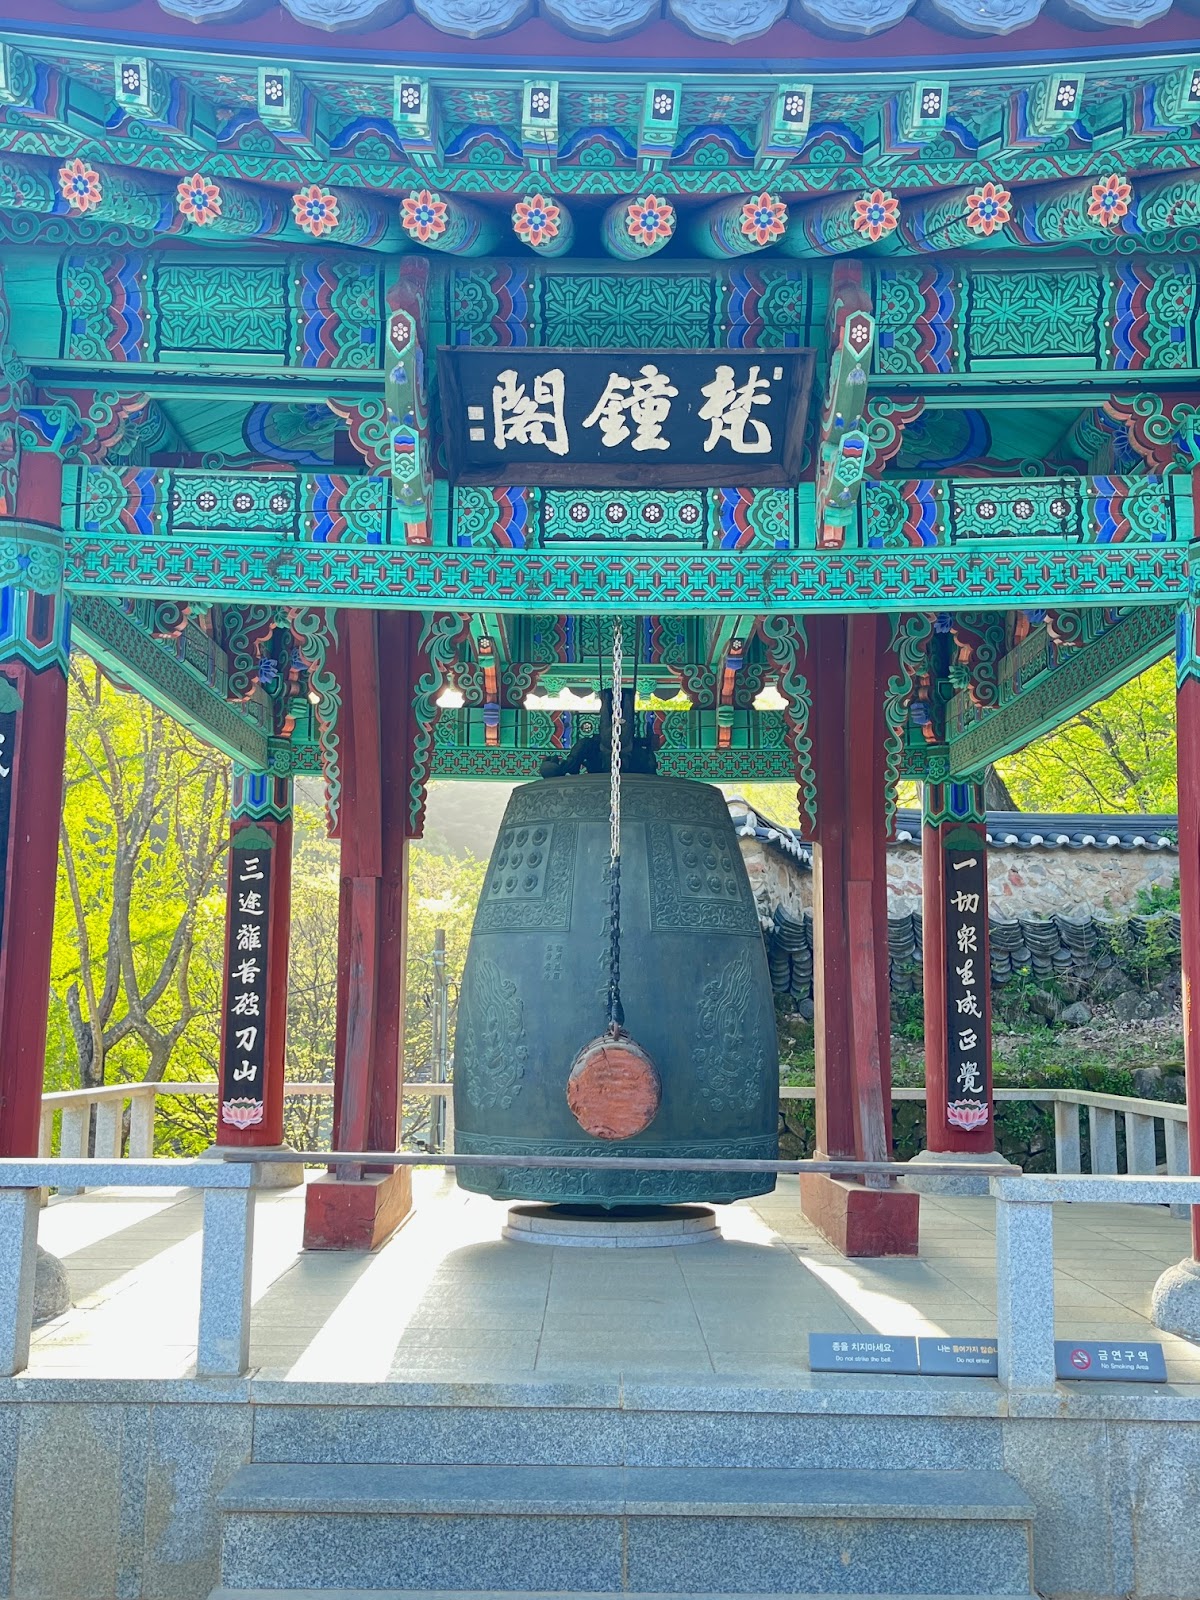 Ring the bell.  At the oldest temple near Andong, South Korea.